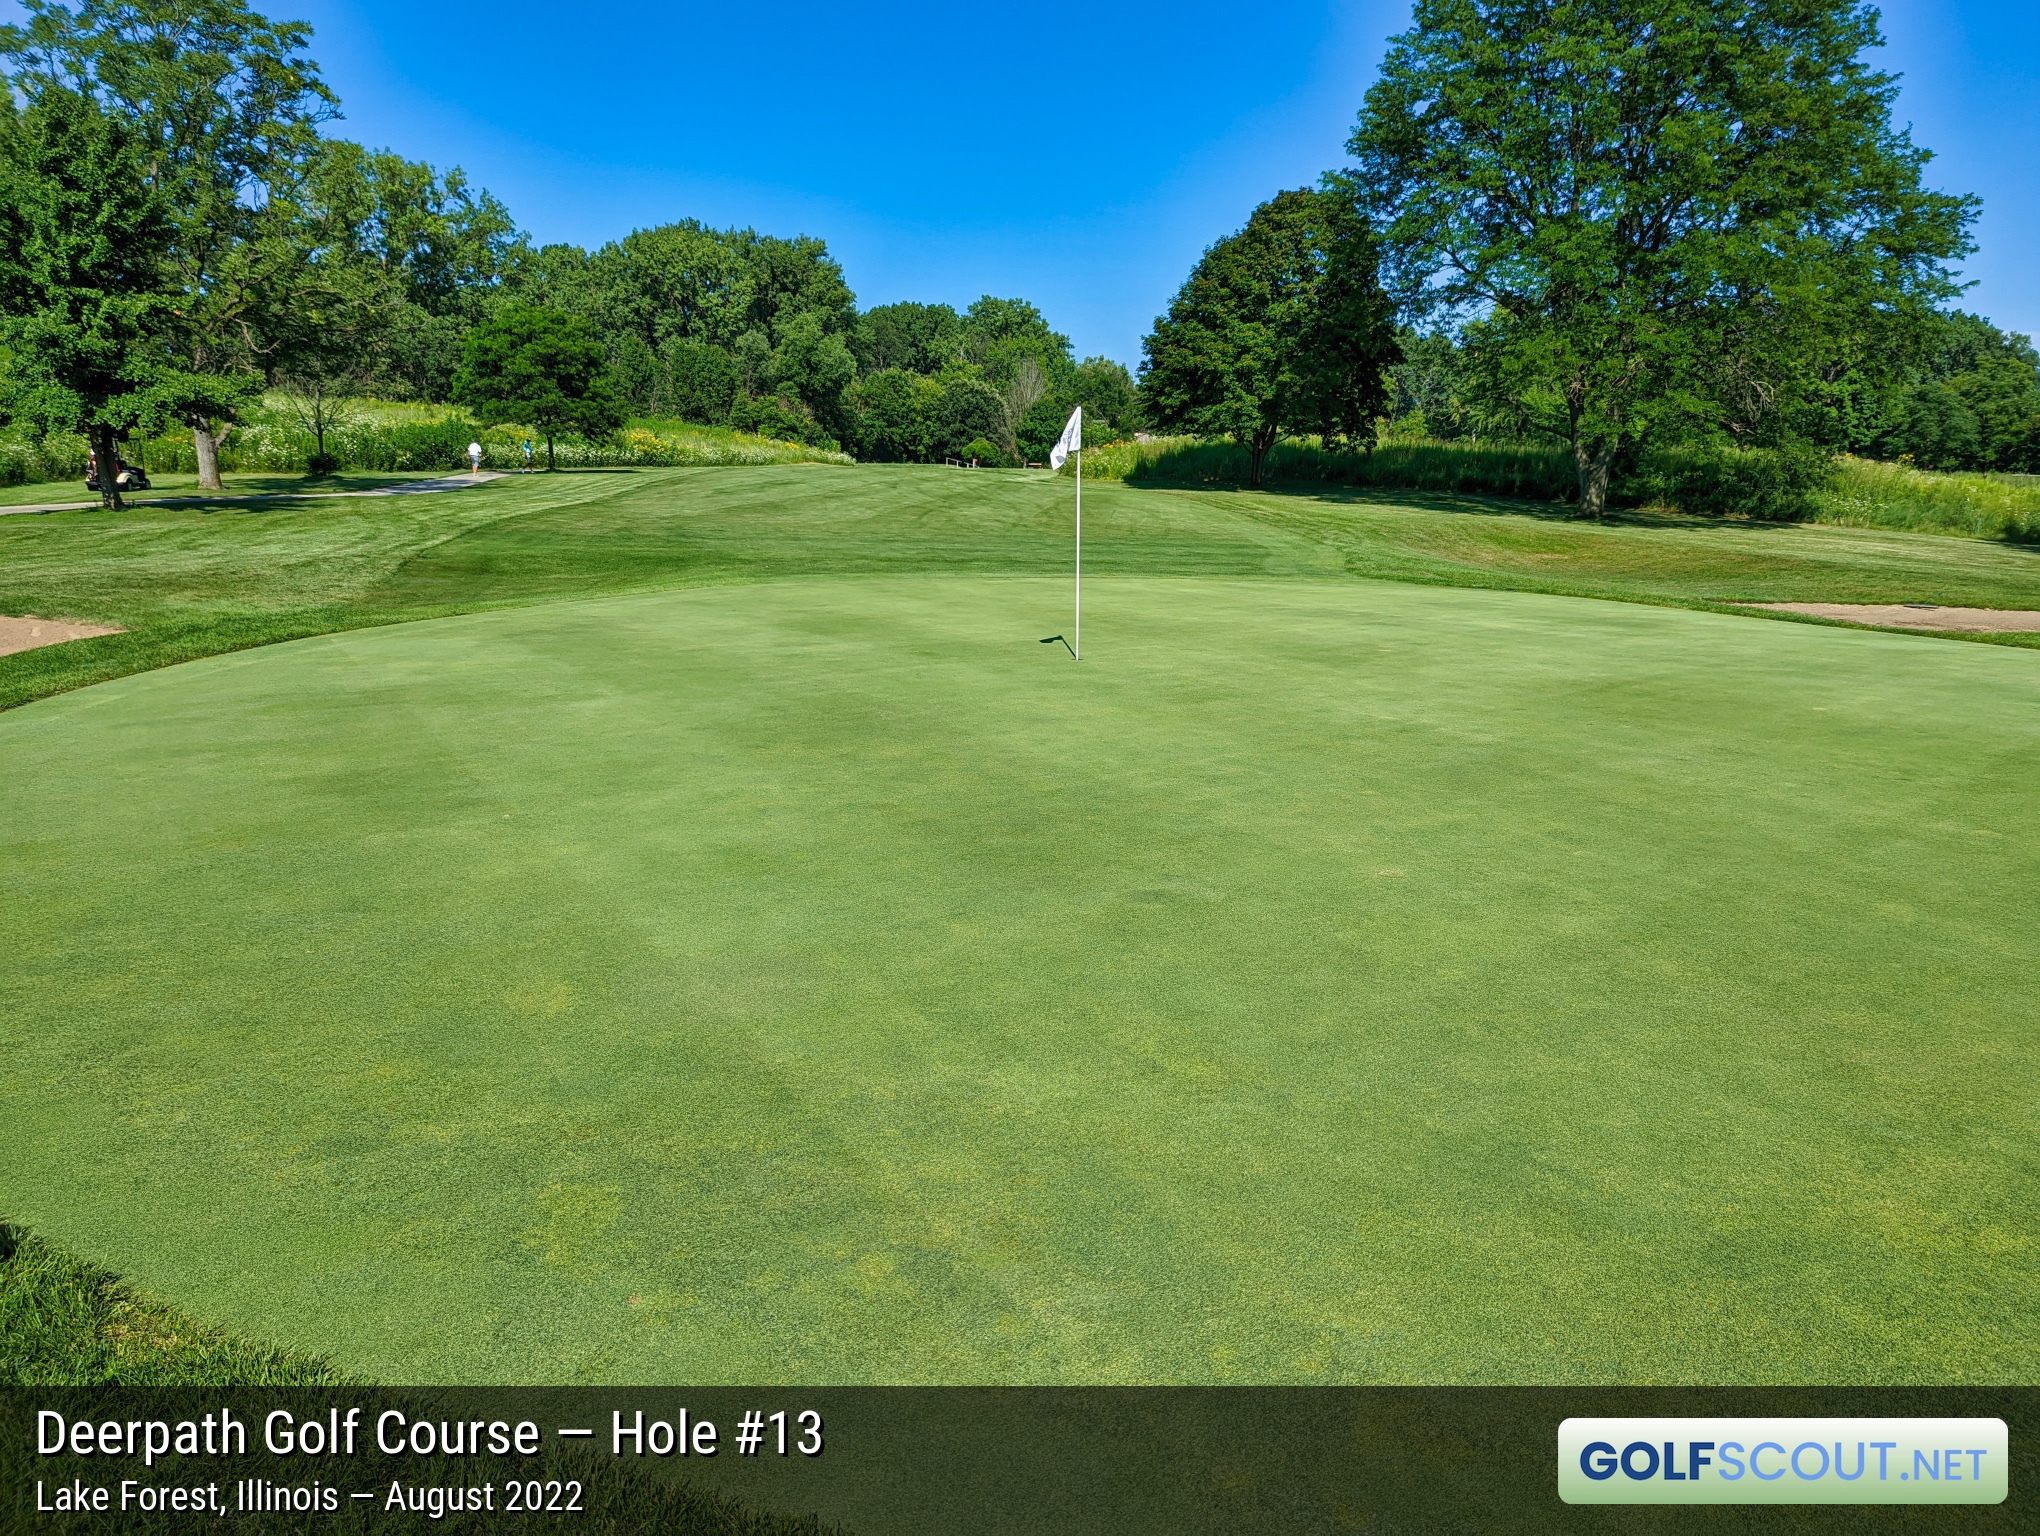 Photo of hole #13 at Deerpath Golf Course in Lake Forest, Illinois. 